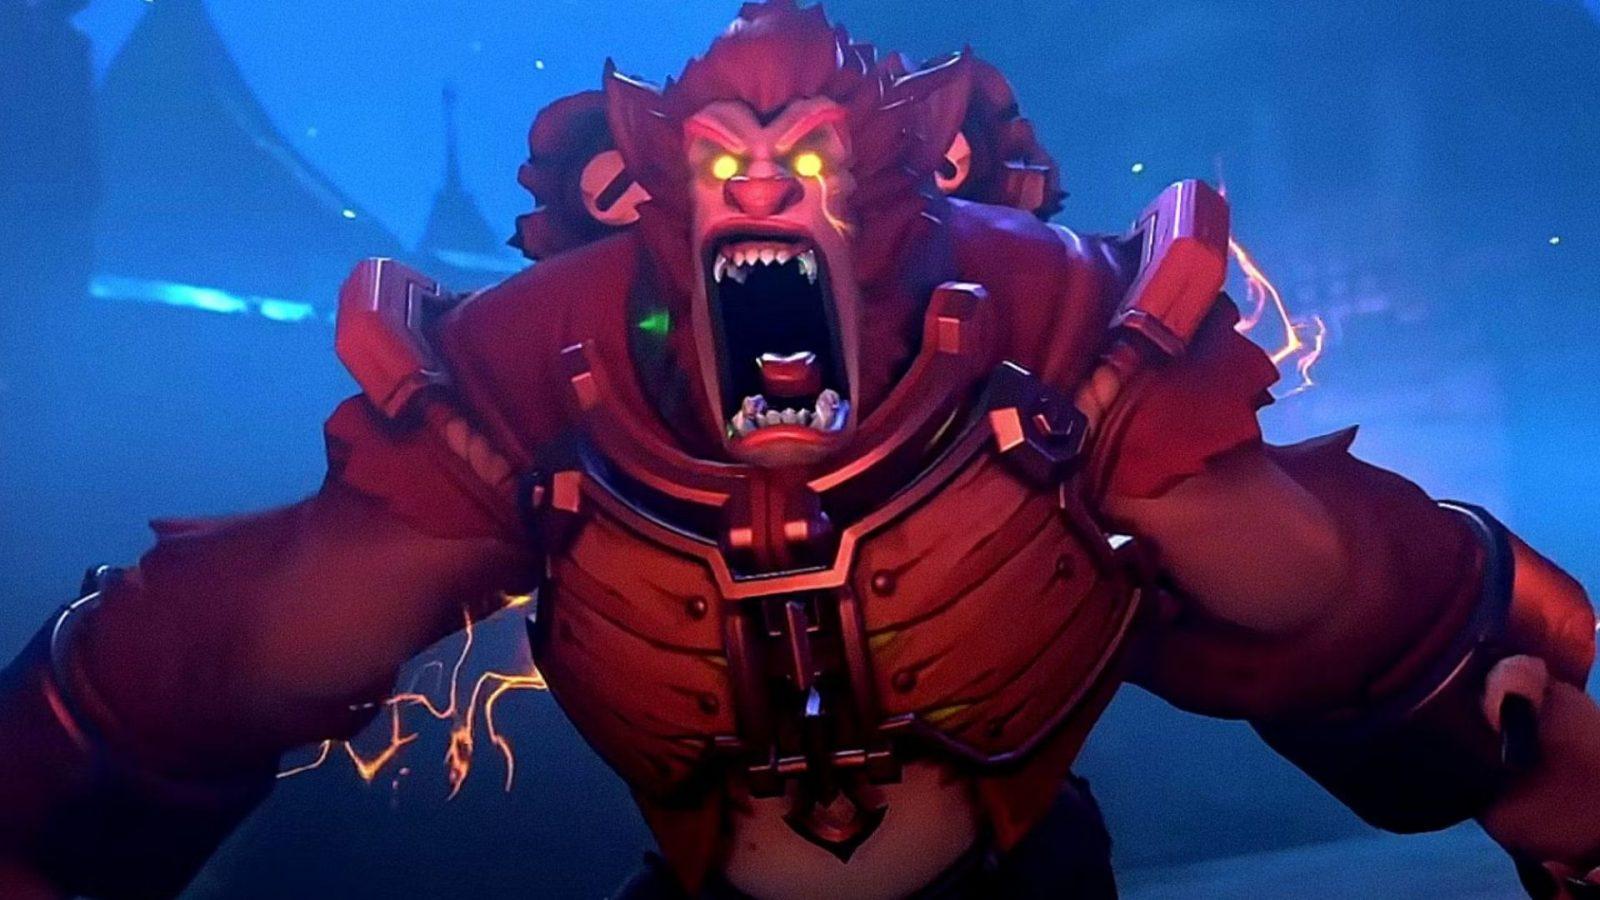 angry winston in overwatch 2